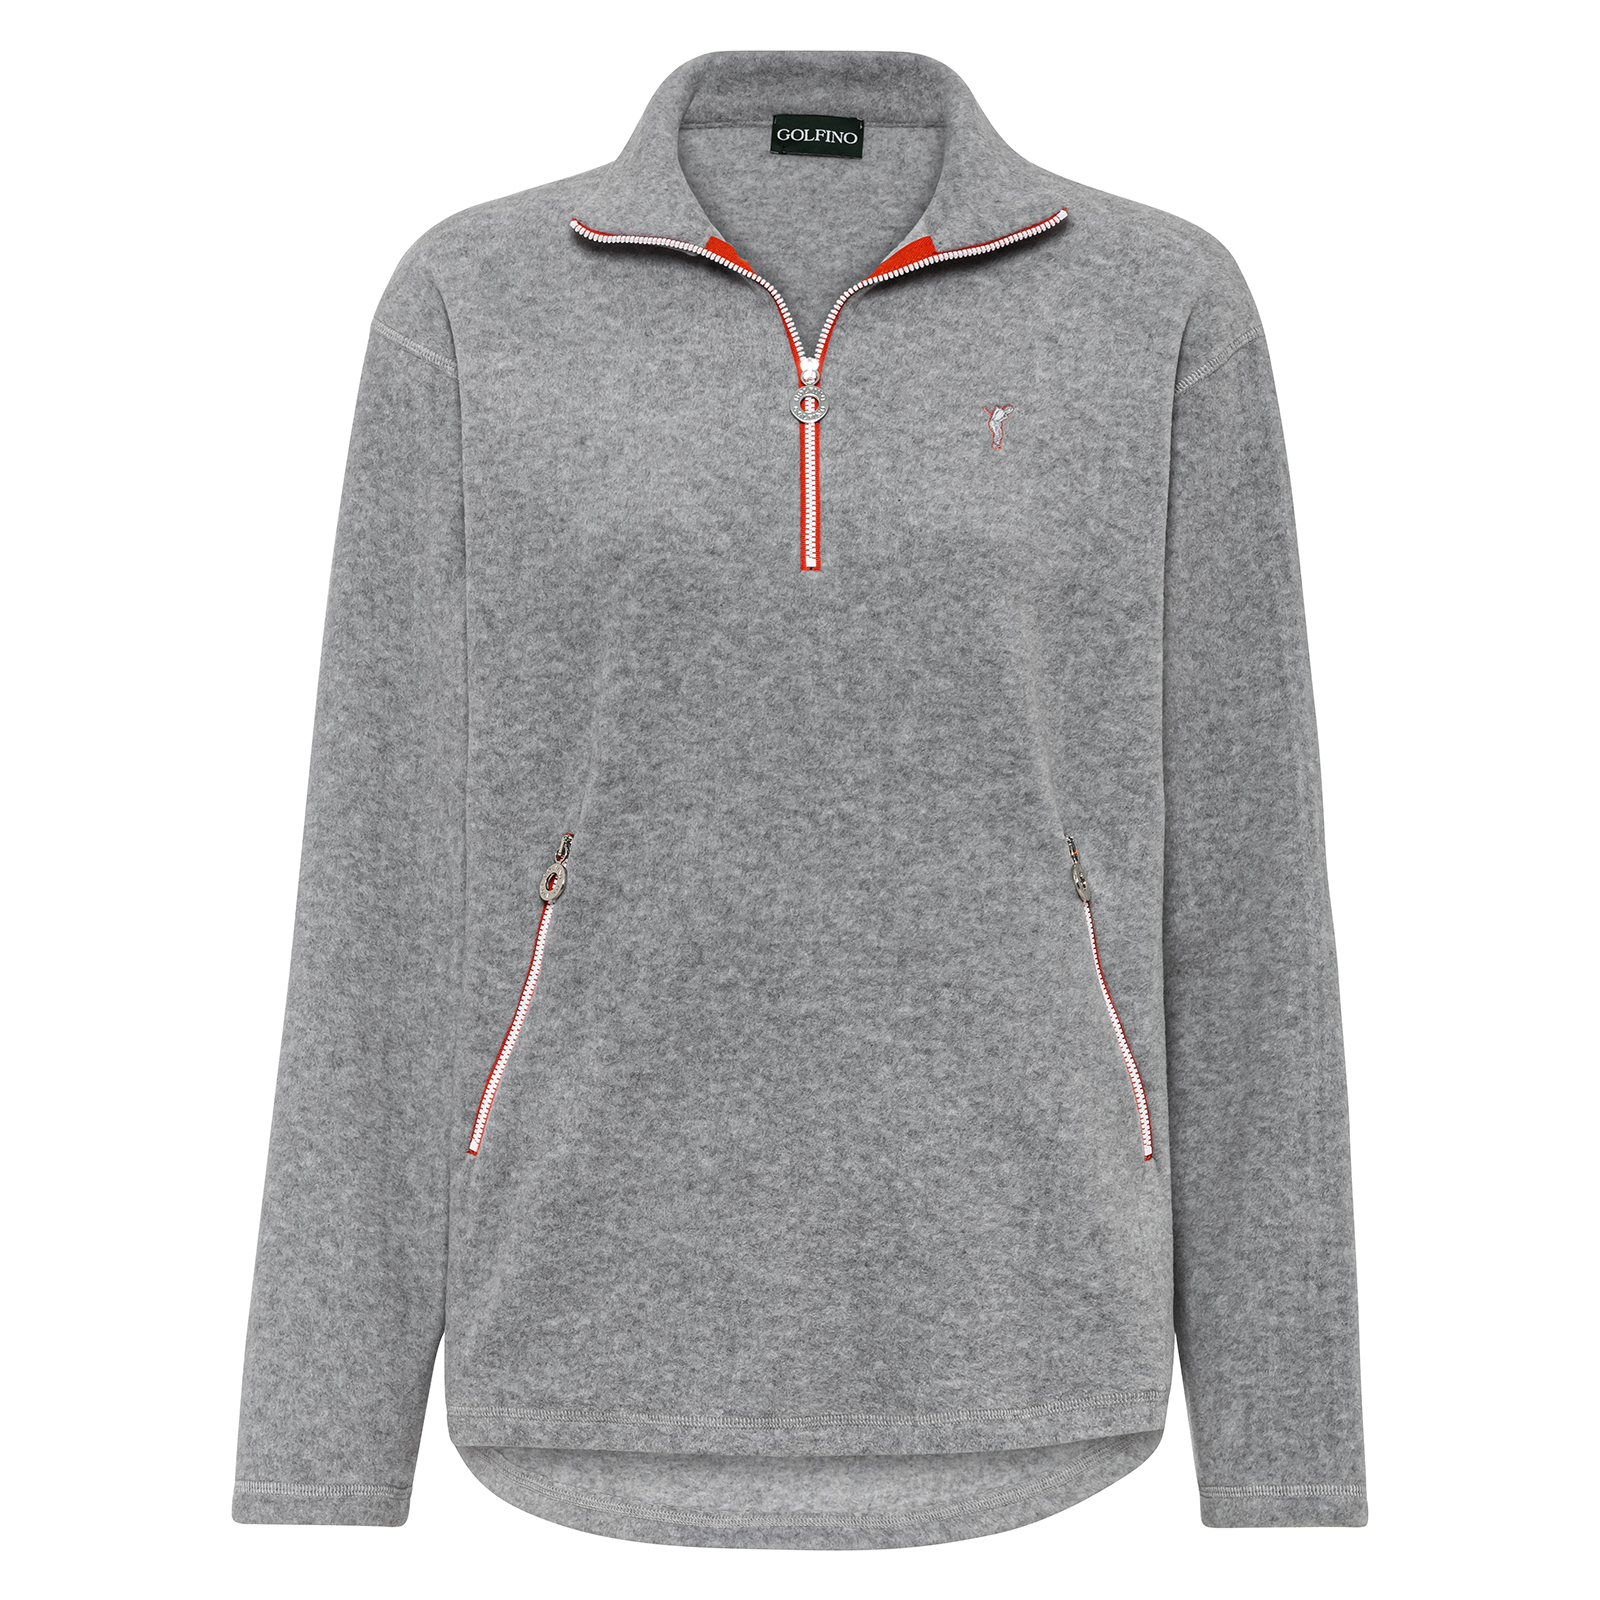 Ladies' soft fleece, half-zip golf sweater with cold weather protection 